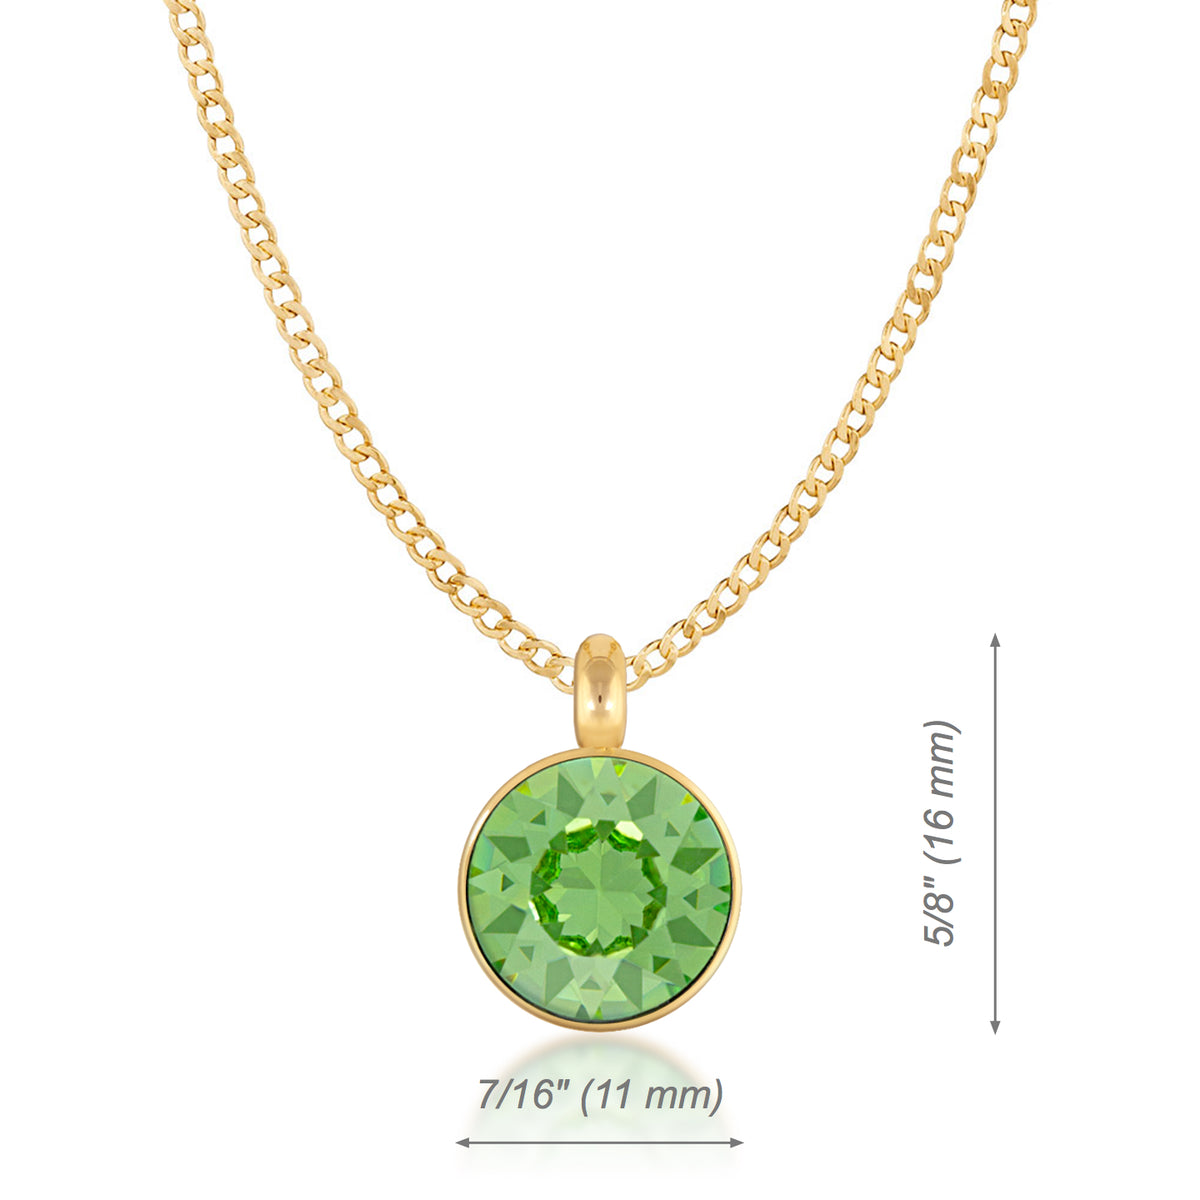 Bella Pendant Necklace with Green Peridot Round Crystals from Swarovski Gold Plated - Ed Heart